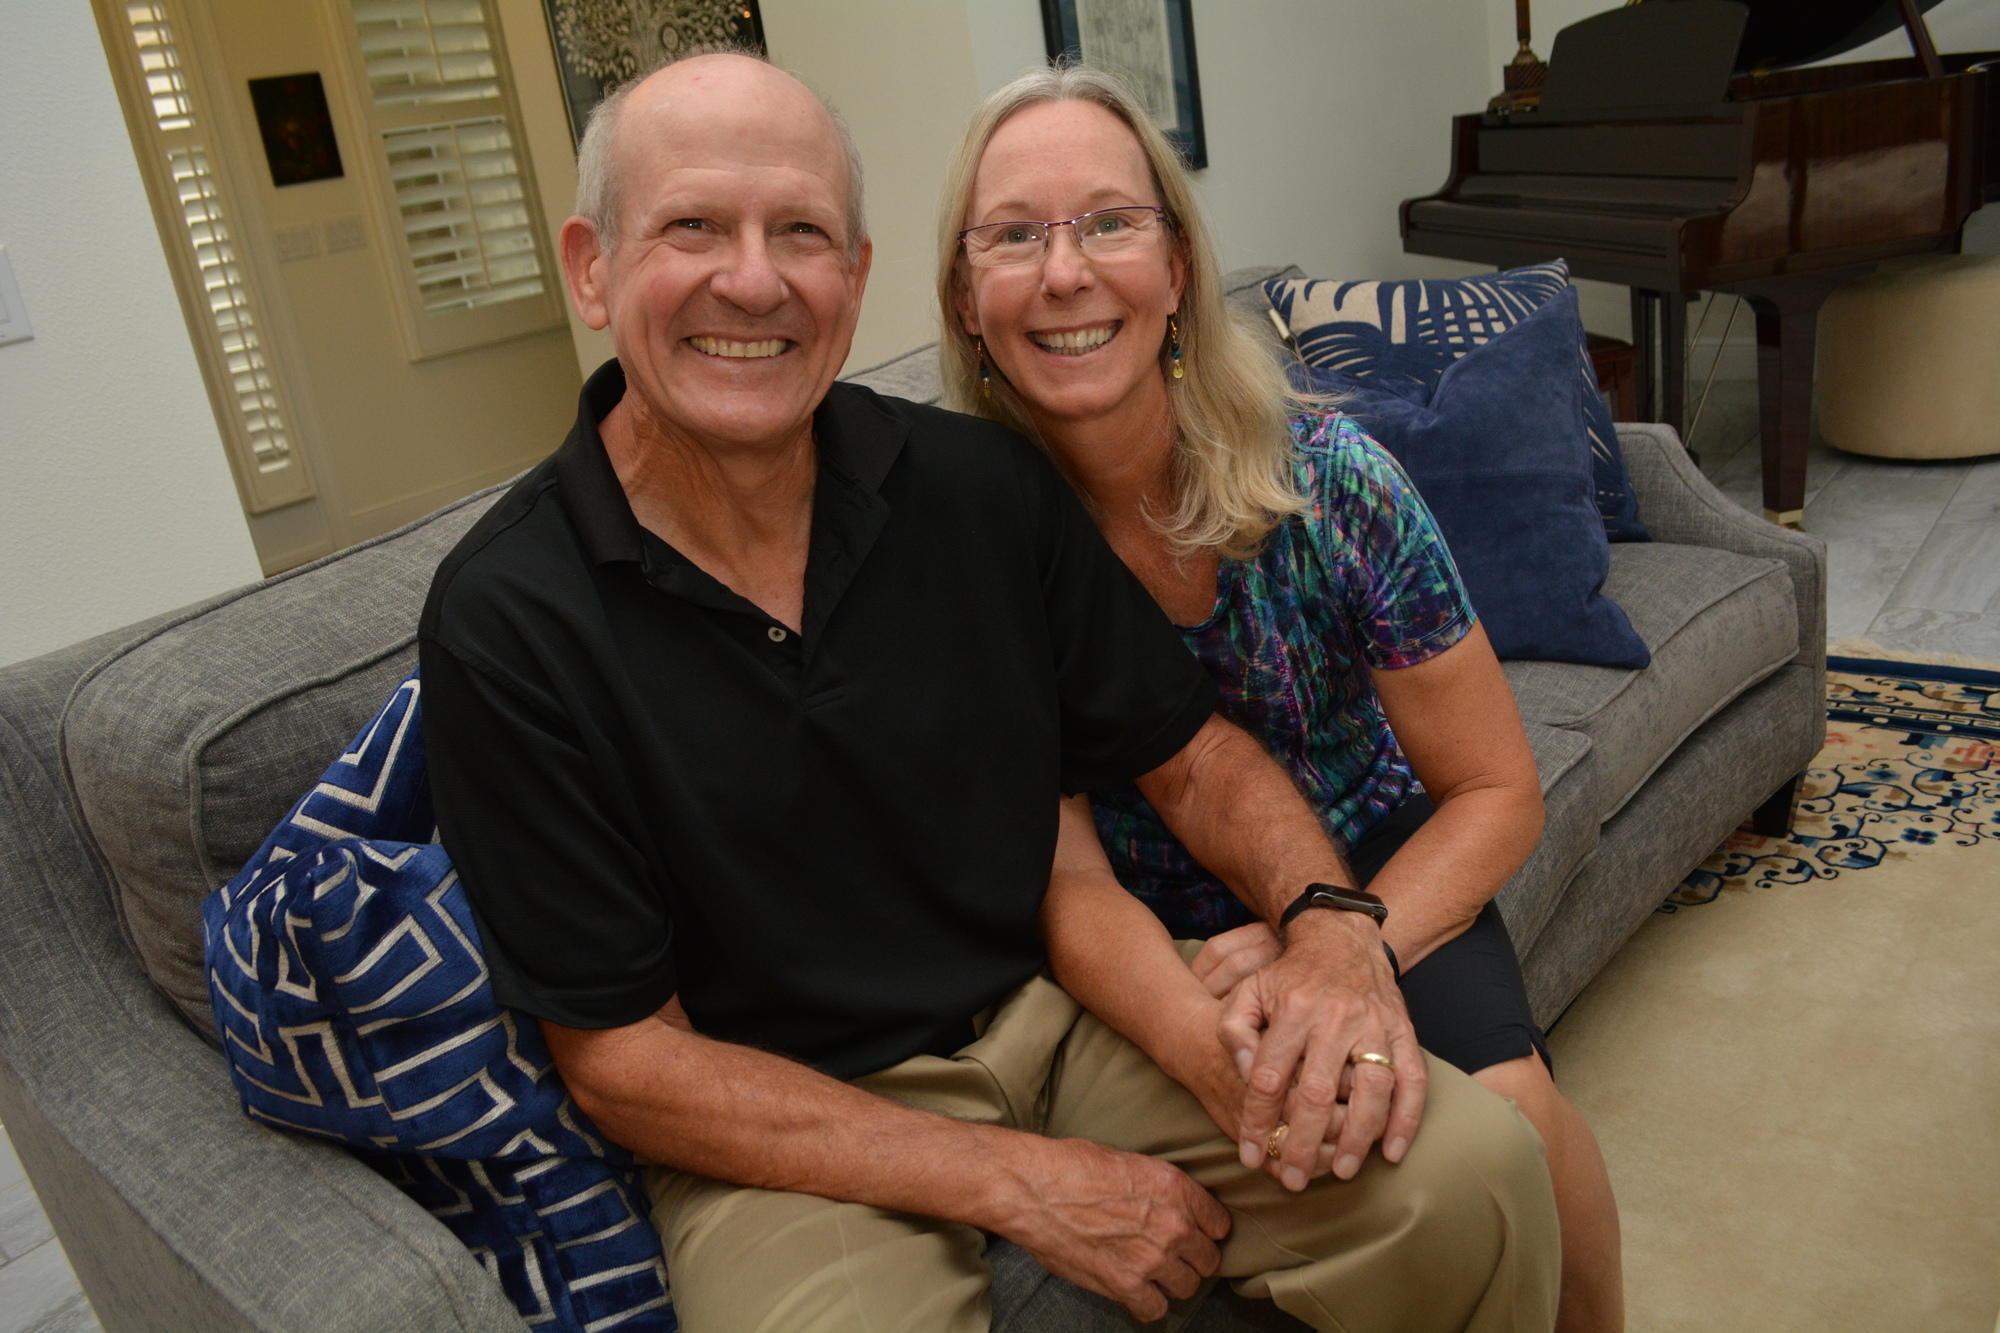 Jim and Susan Eicken got married in college during winter break when their friends could attend their wedding. They do almost everything together — travel, tennis, photography and cycling.